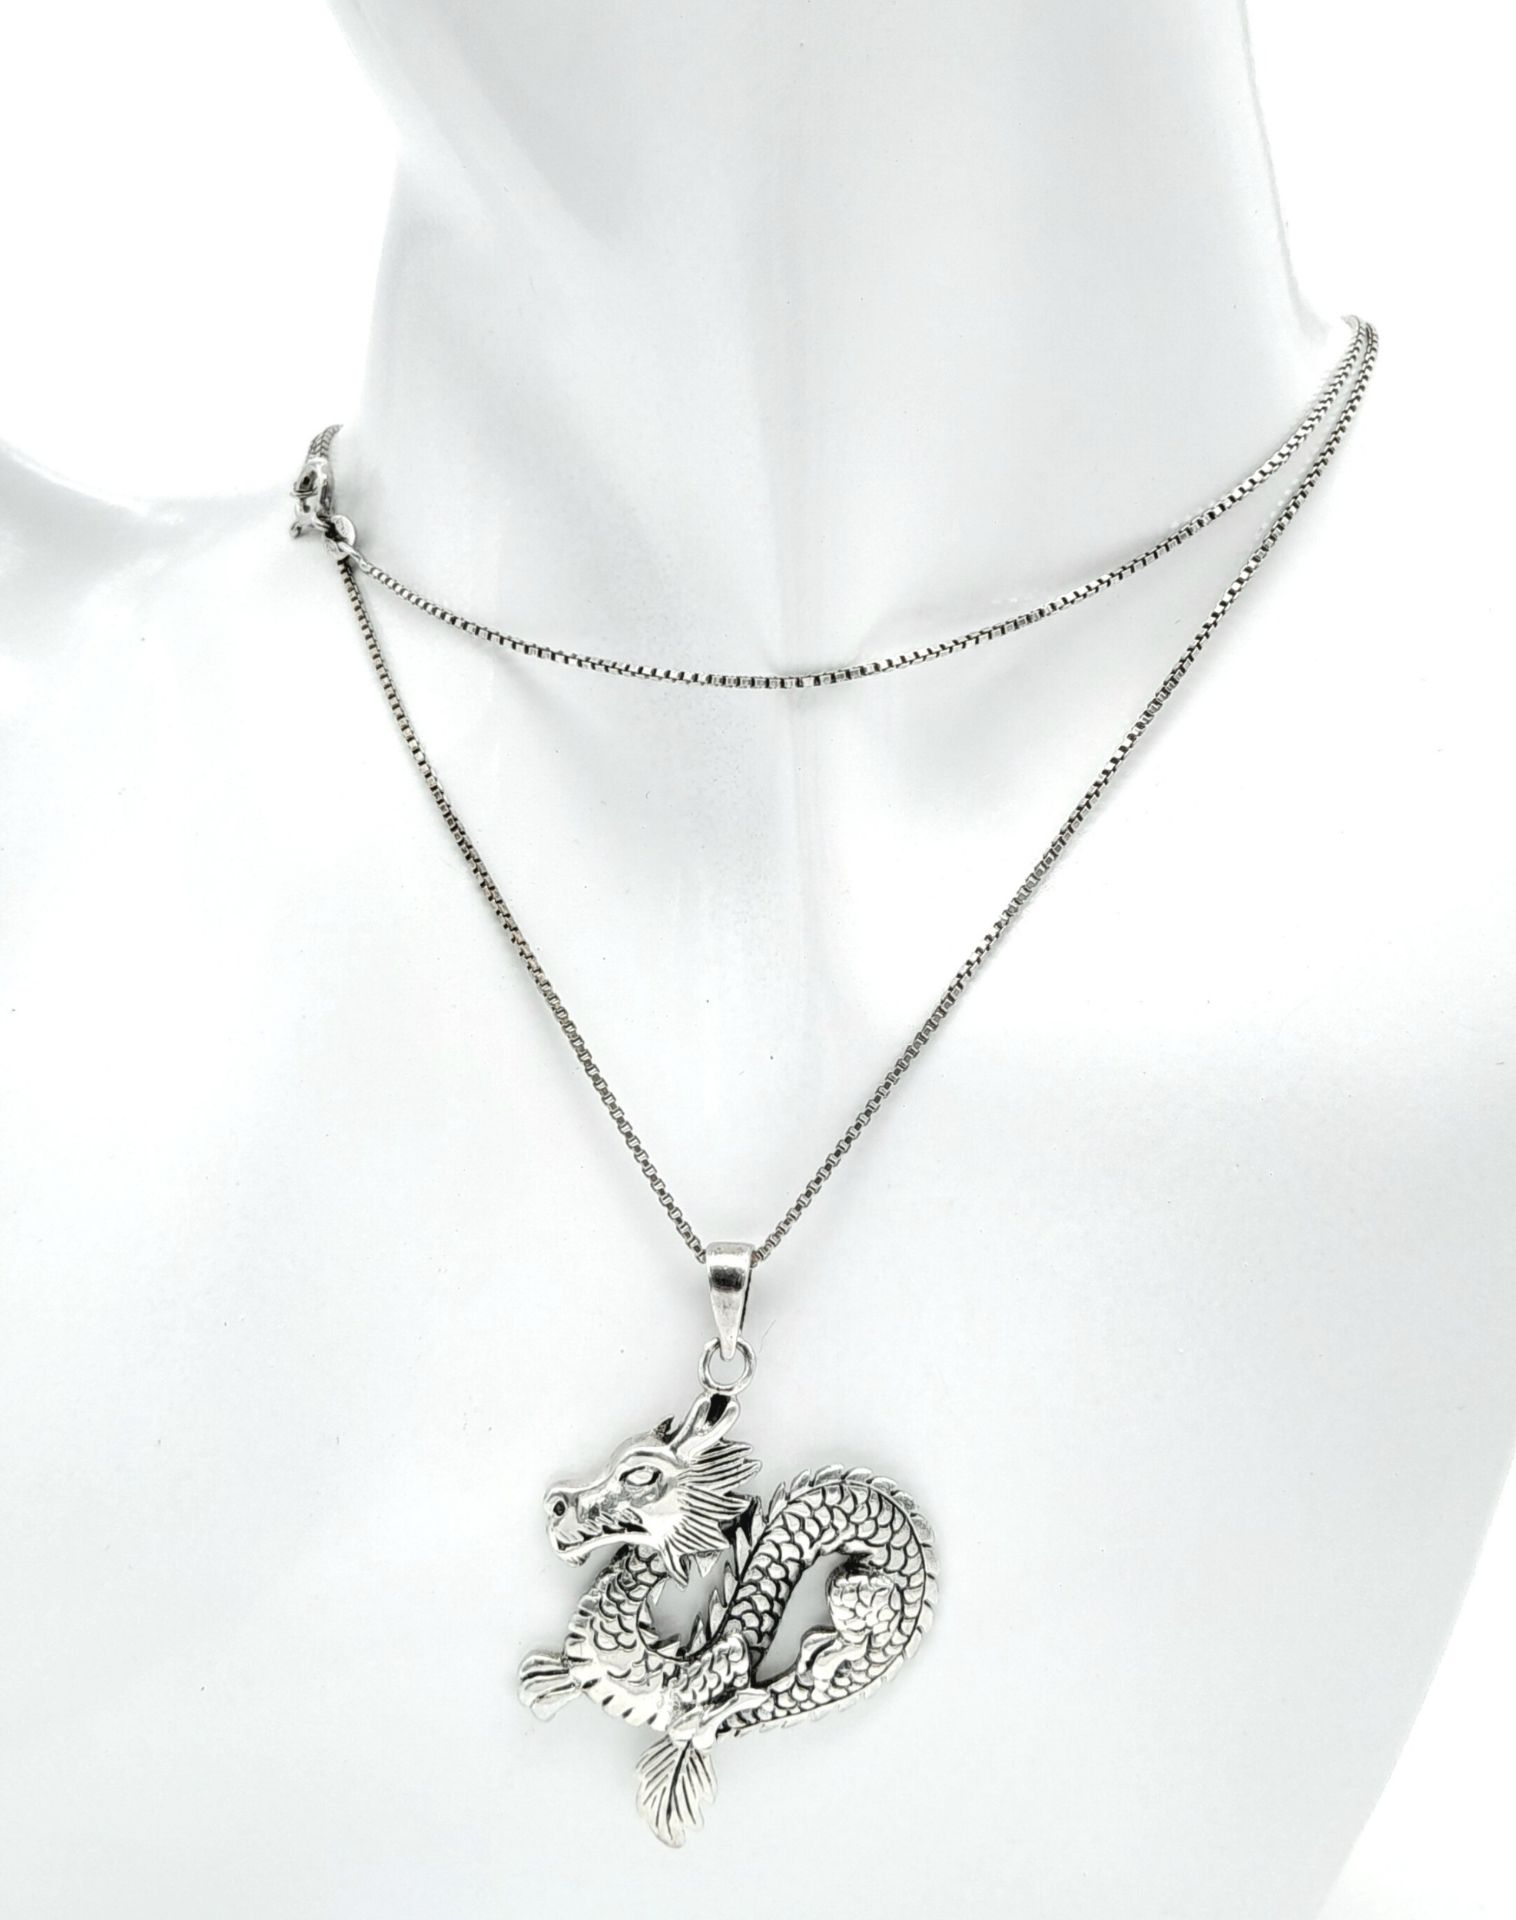 A Sterling Silver Dragon Pendant on 925 Silver Chain. 4.5cm pendant, 62cm chain. 9.7g total weight. - Bild 3 aus 5